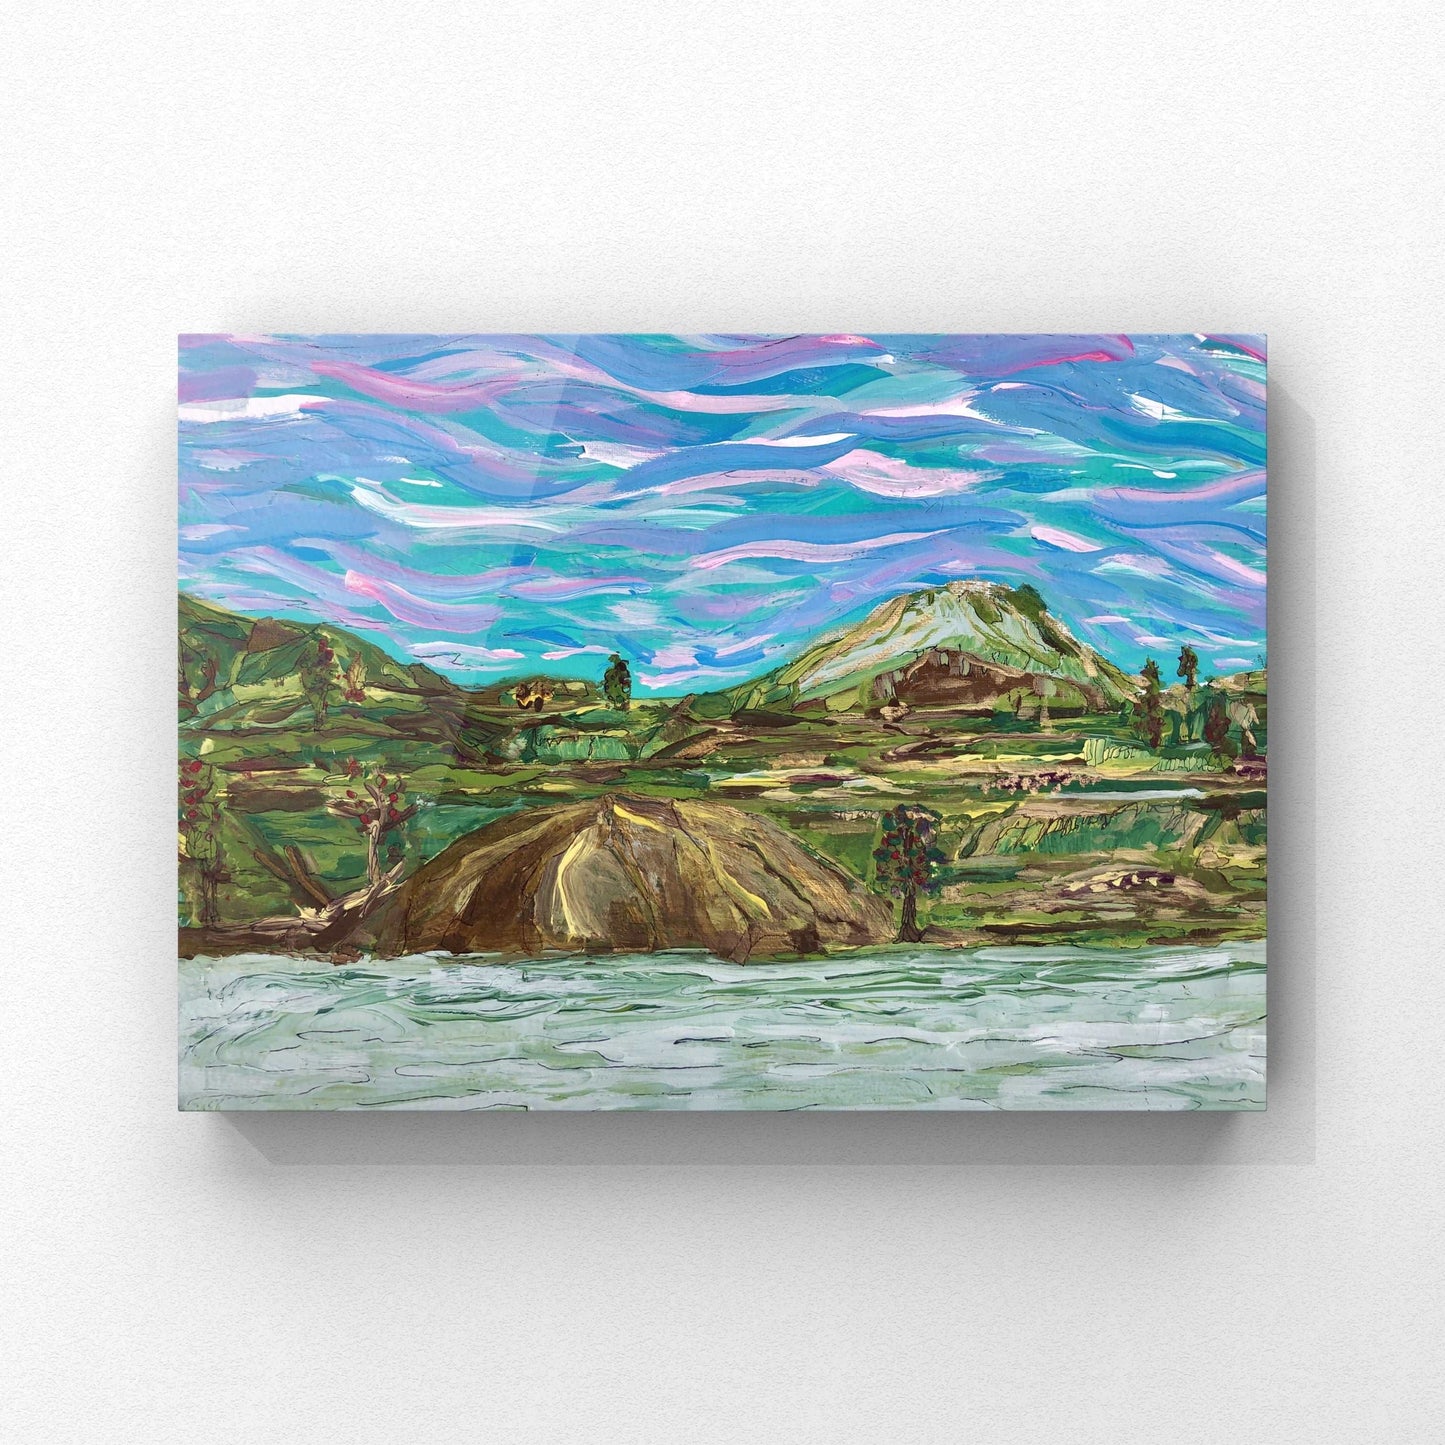 Green Land - Small, Mixed Media, Nature, Mountain Landscape, Original Design, Wall Art by Art with Evie